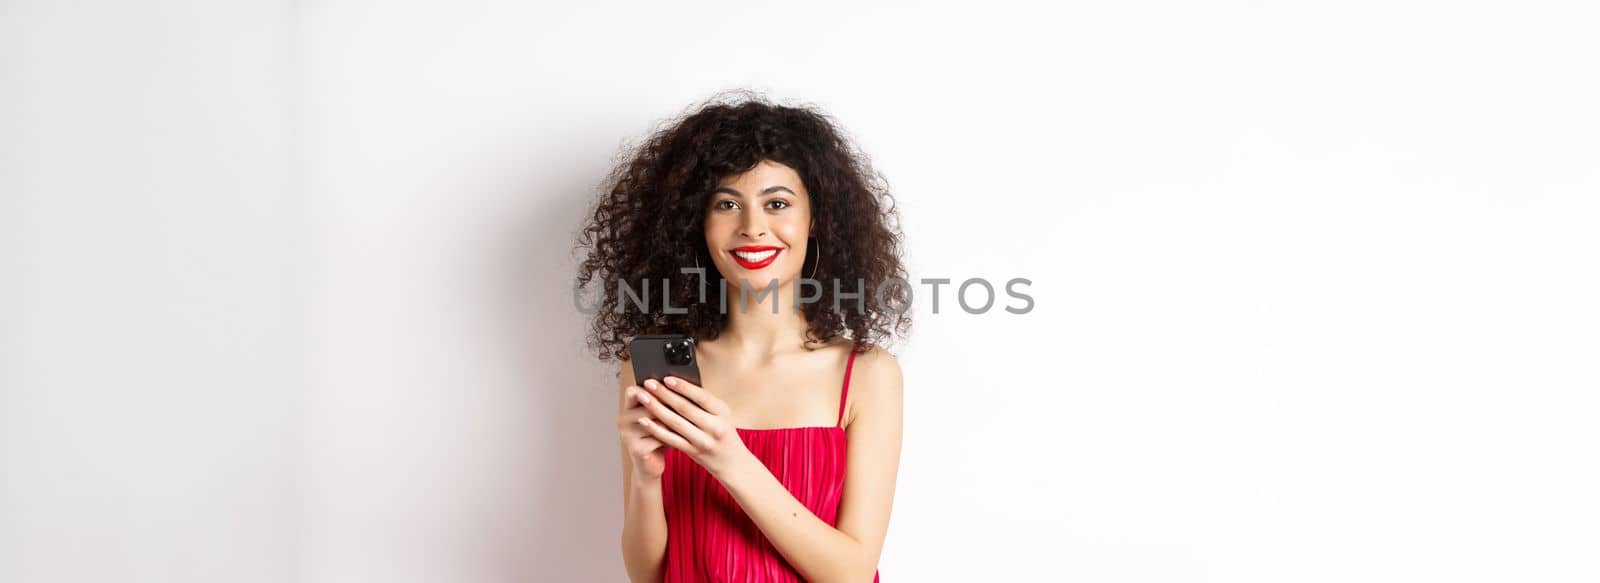 Cheerful woman with curly hair, using smartphone in red dress, smiling at camera, standing over white background. Copy space